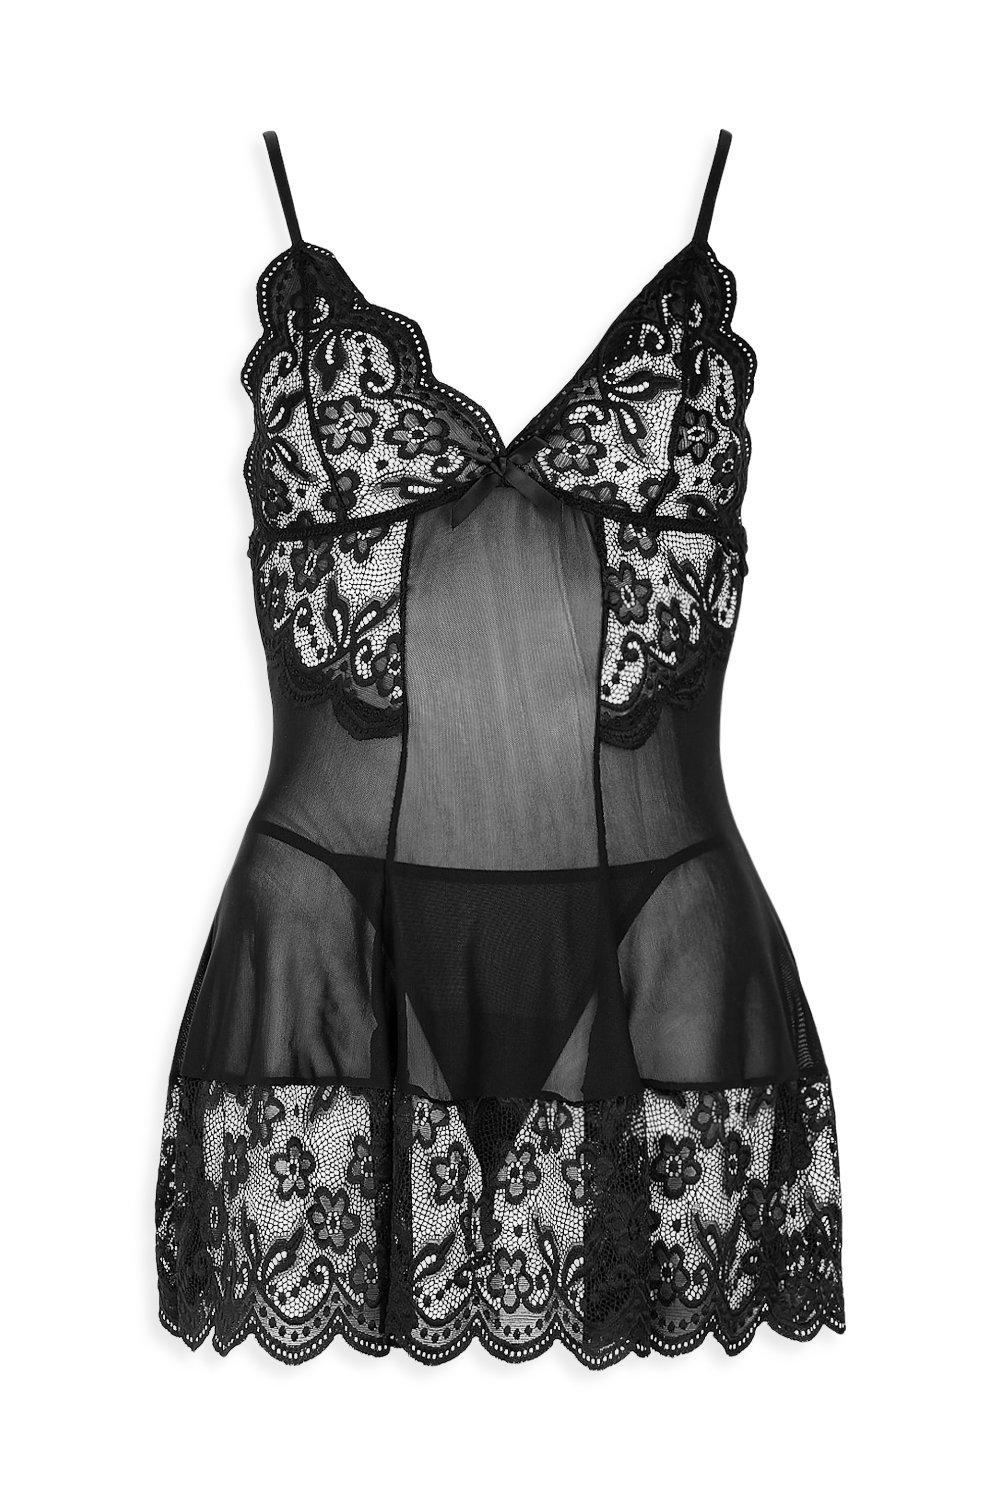 Black Mesh Babydoll Dress by Flash You and Me Lingerie